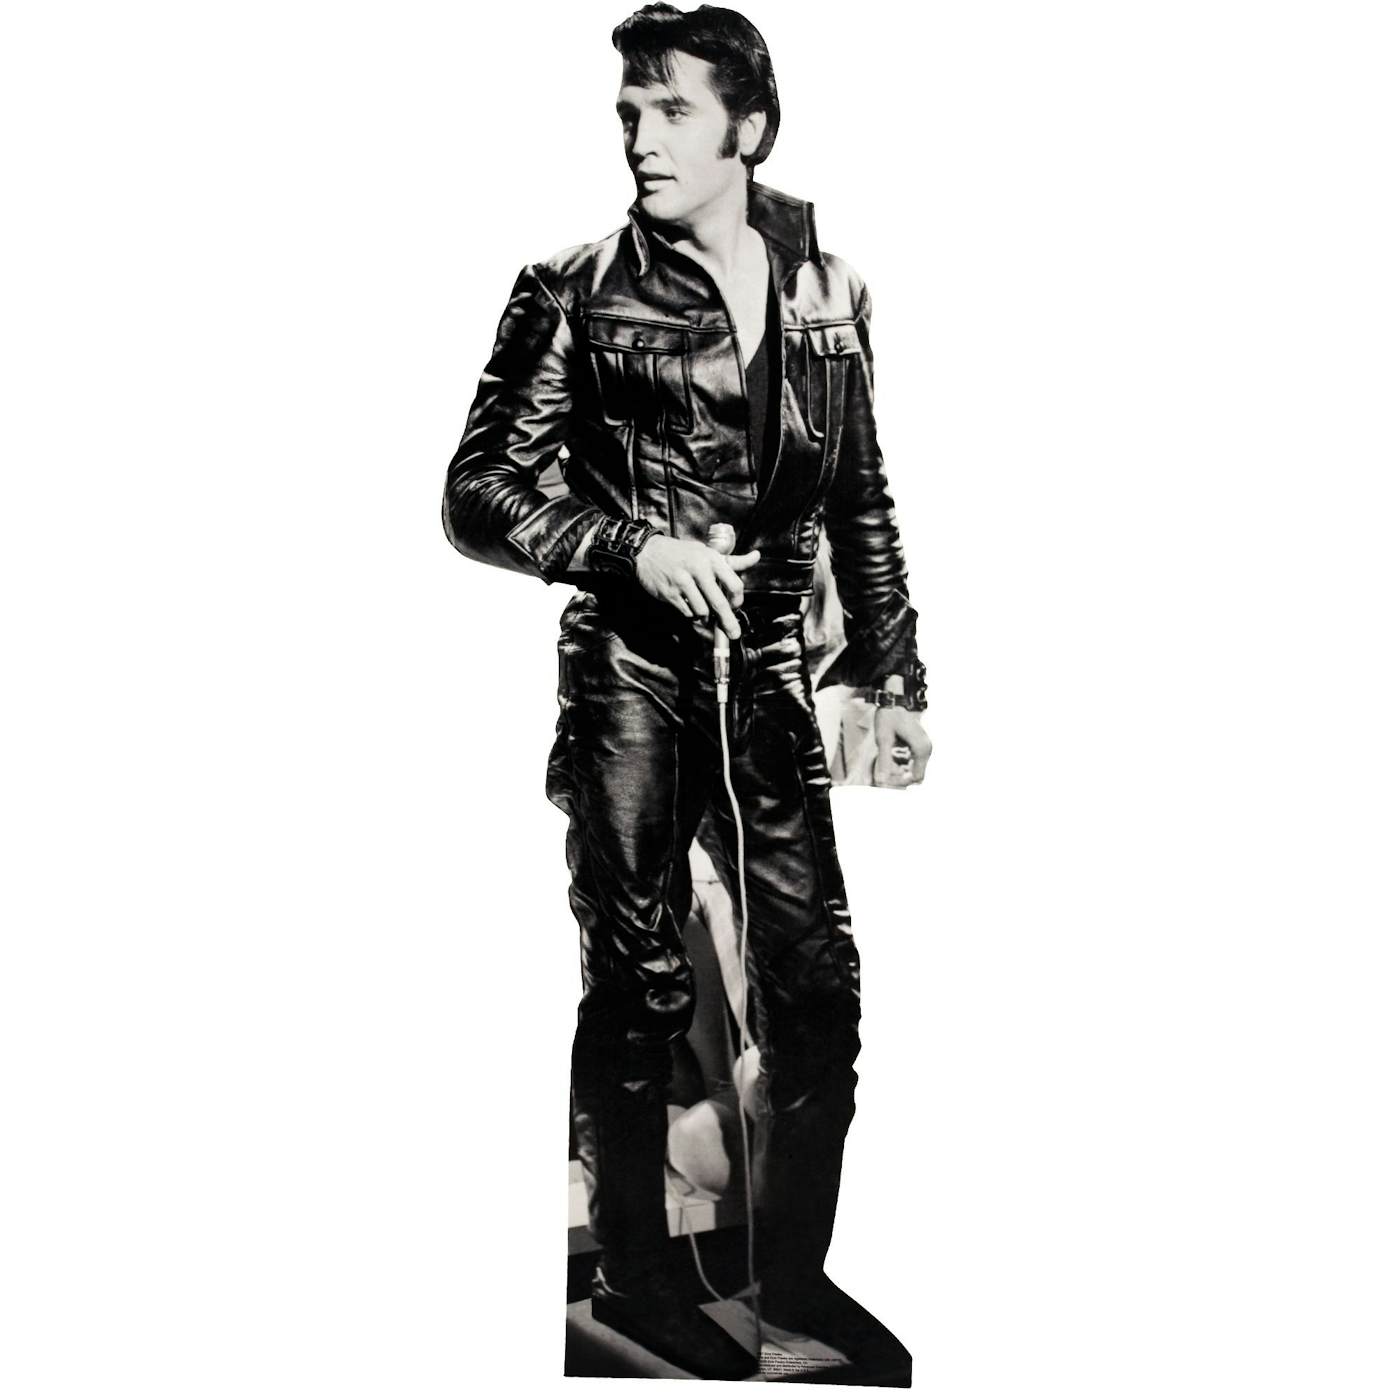 Elvis Presley '68 Comeback Special Lifesize Stand Up